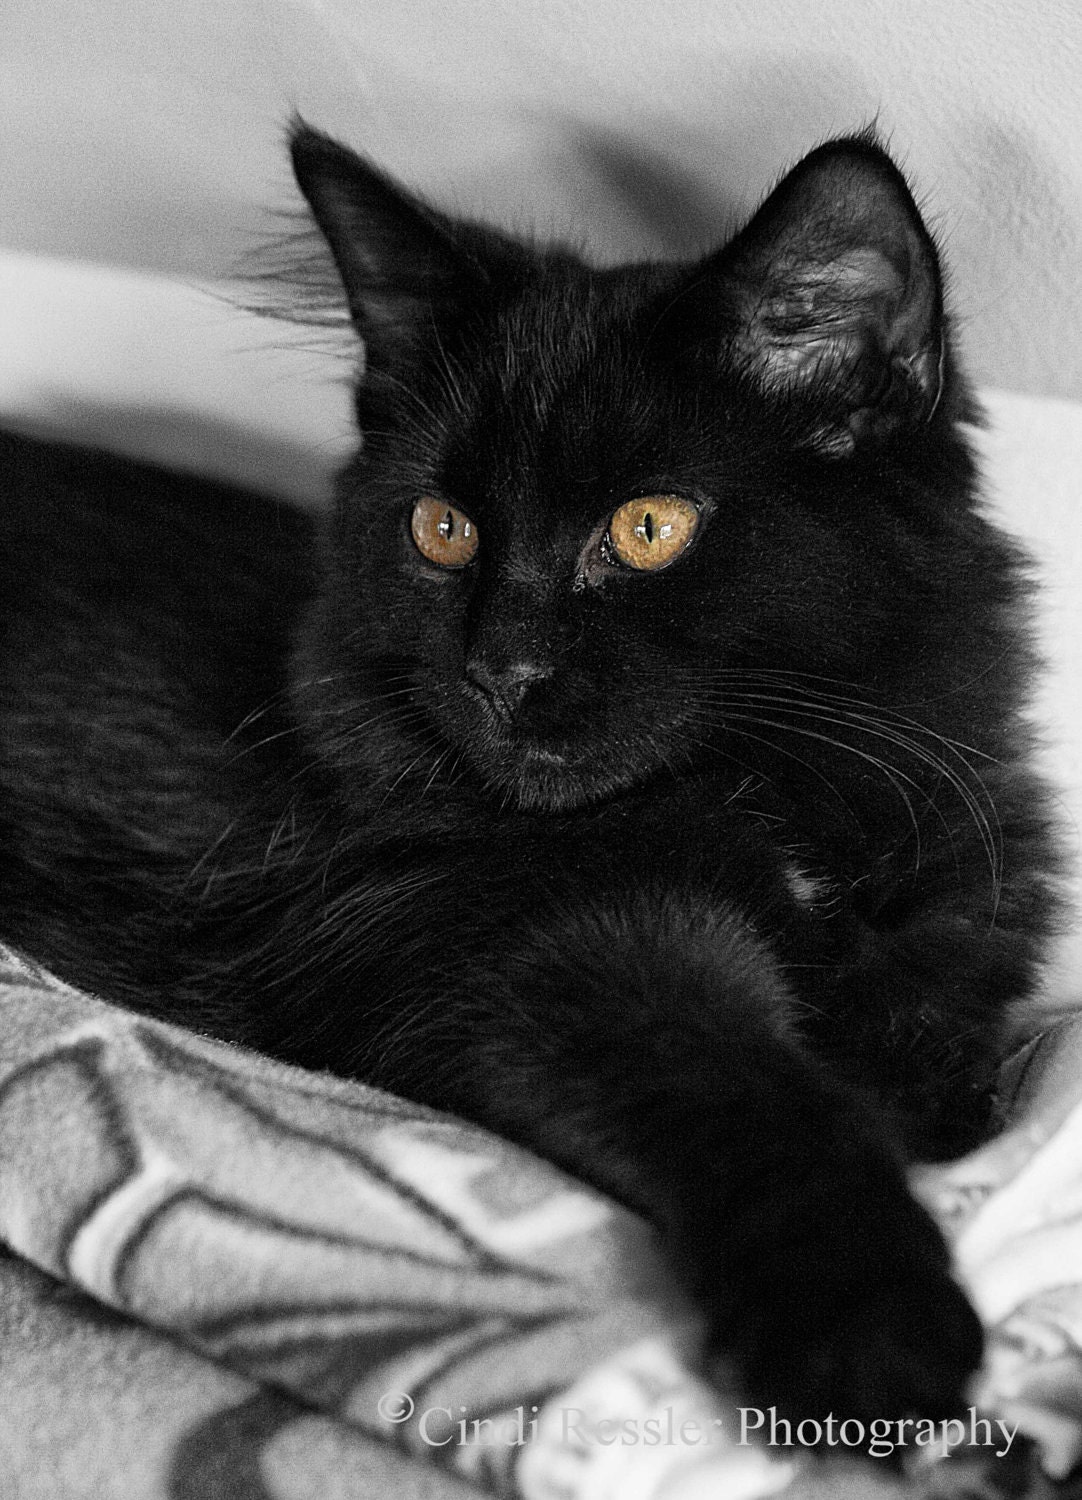 Maggie, 5x7 Fine Art Photography, Cat Portrait, Black and White Photography, Charity item - CindiRessler